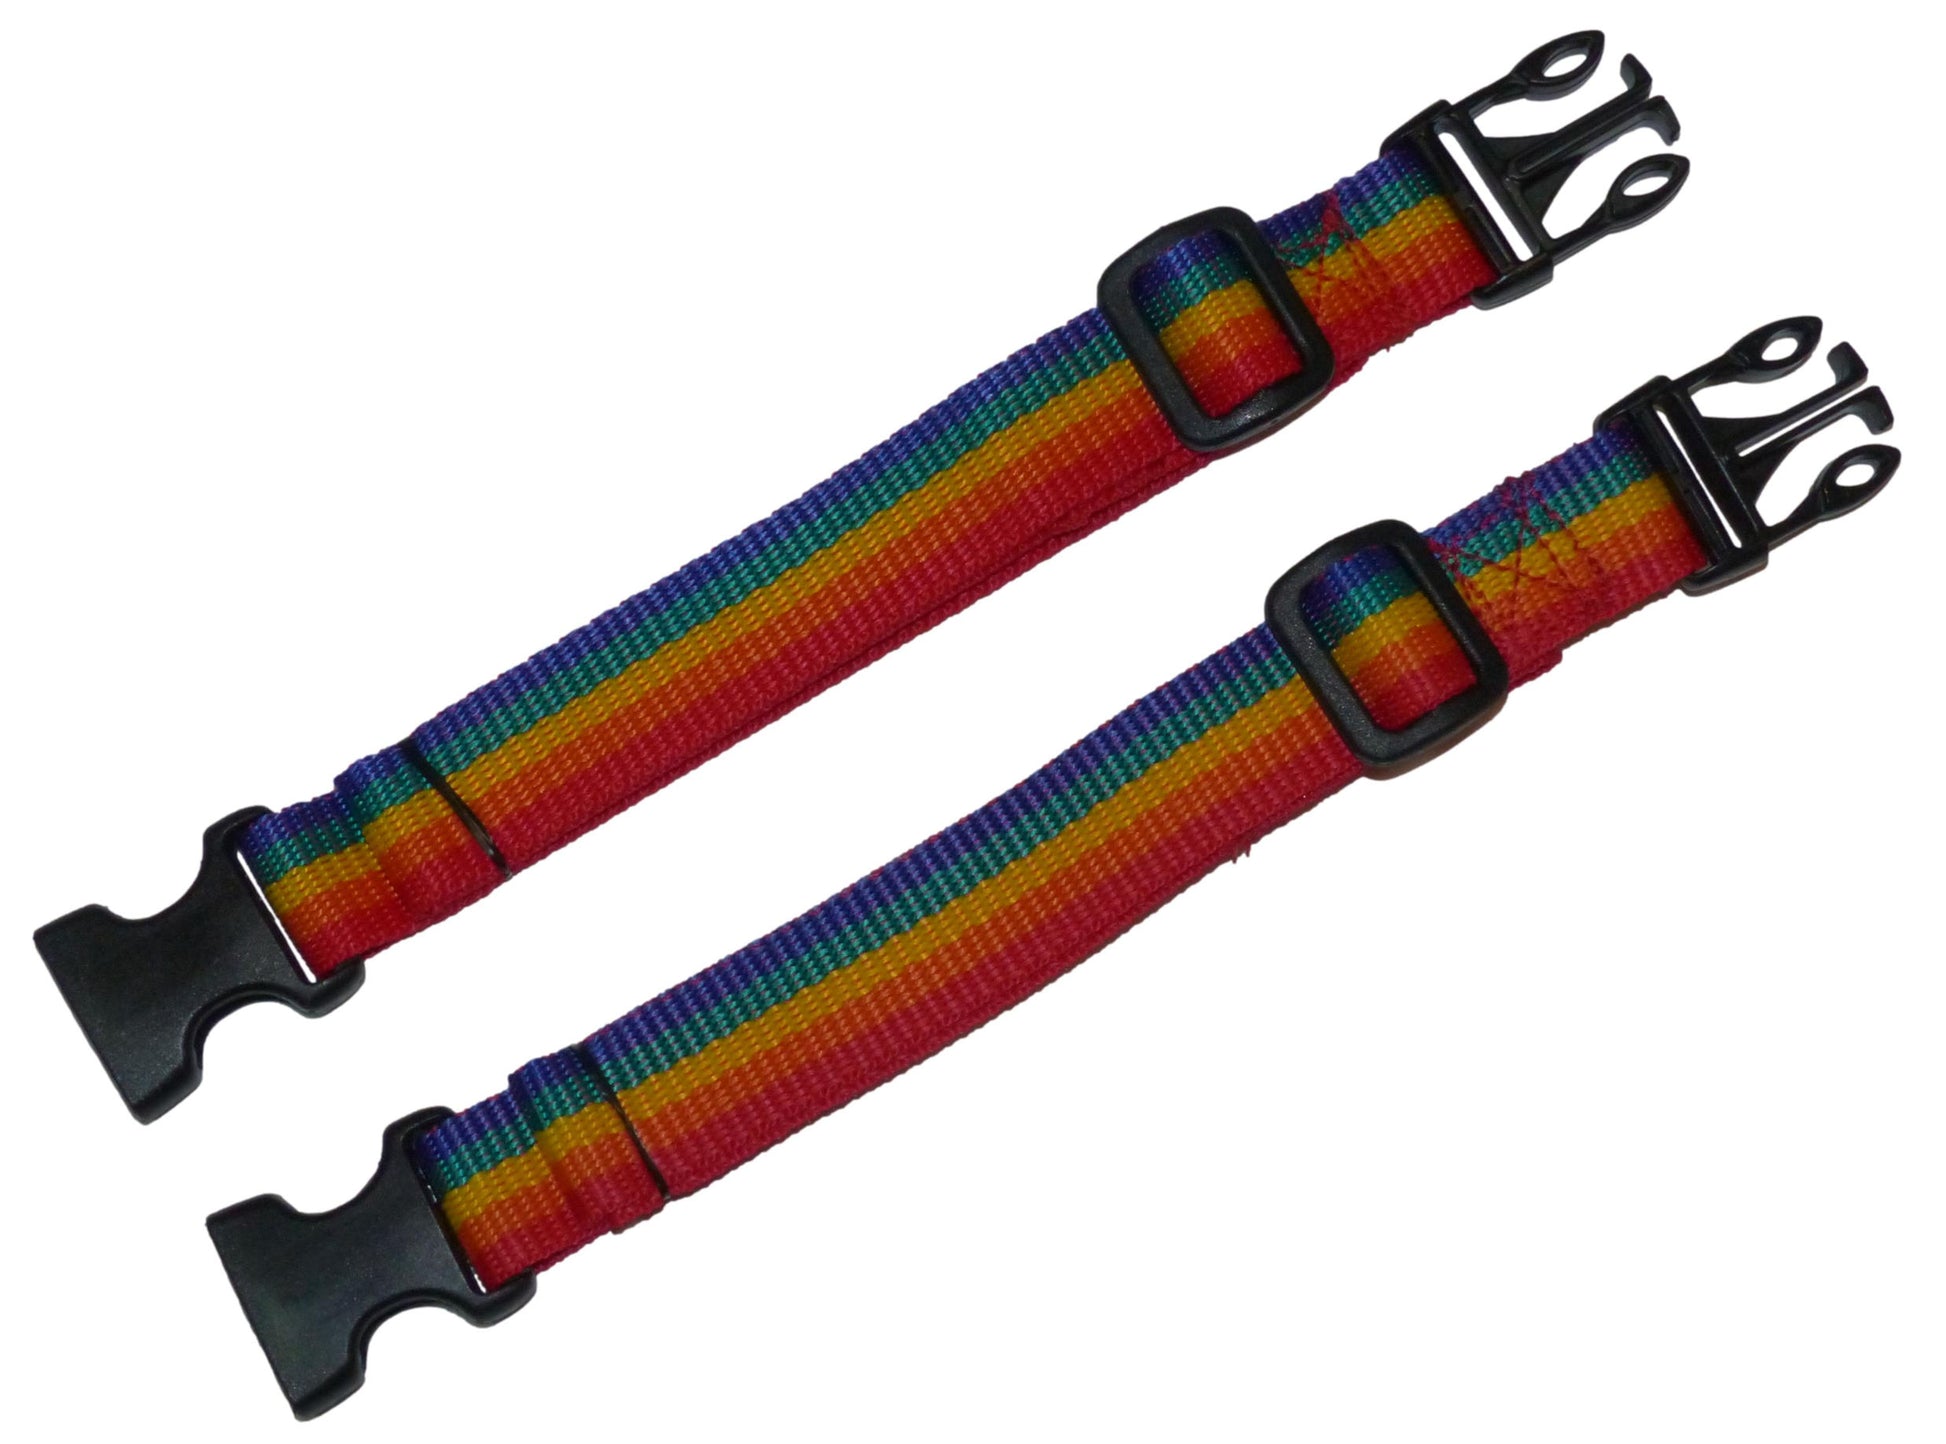 25mm Webbing Strap with Quick Release & Length-Adjusting Buckles (Pair) in rainbow colours